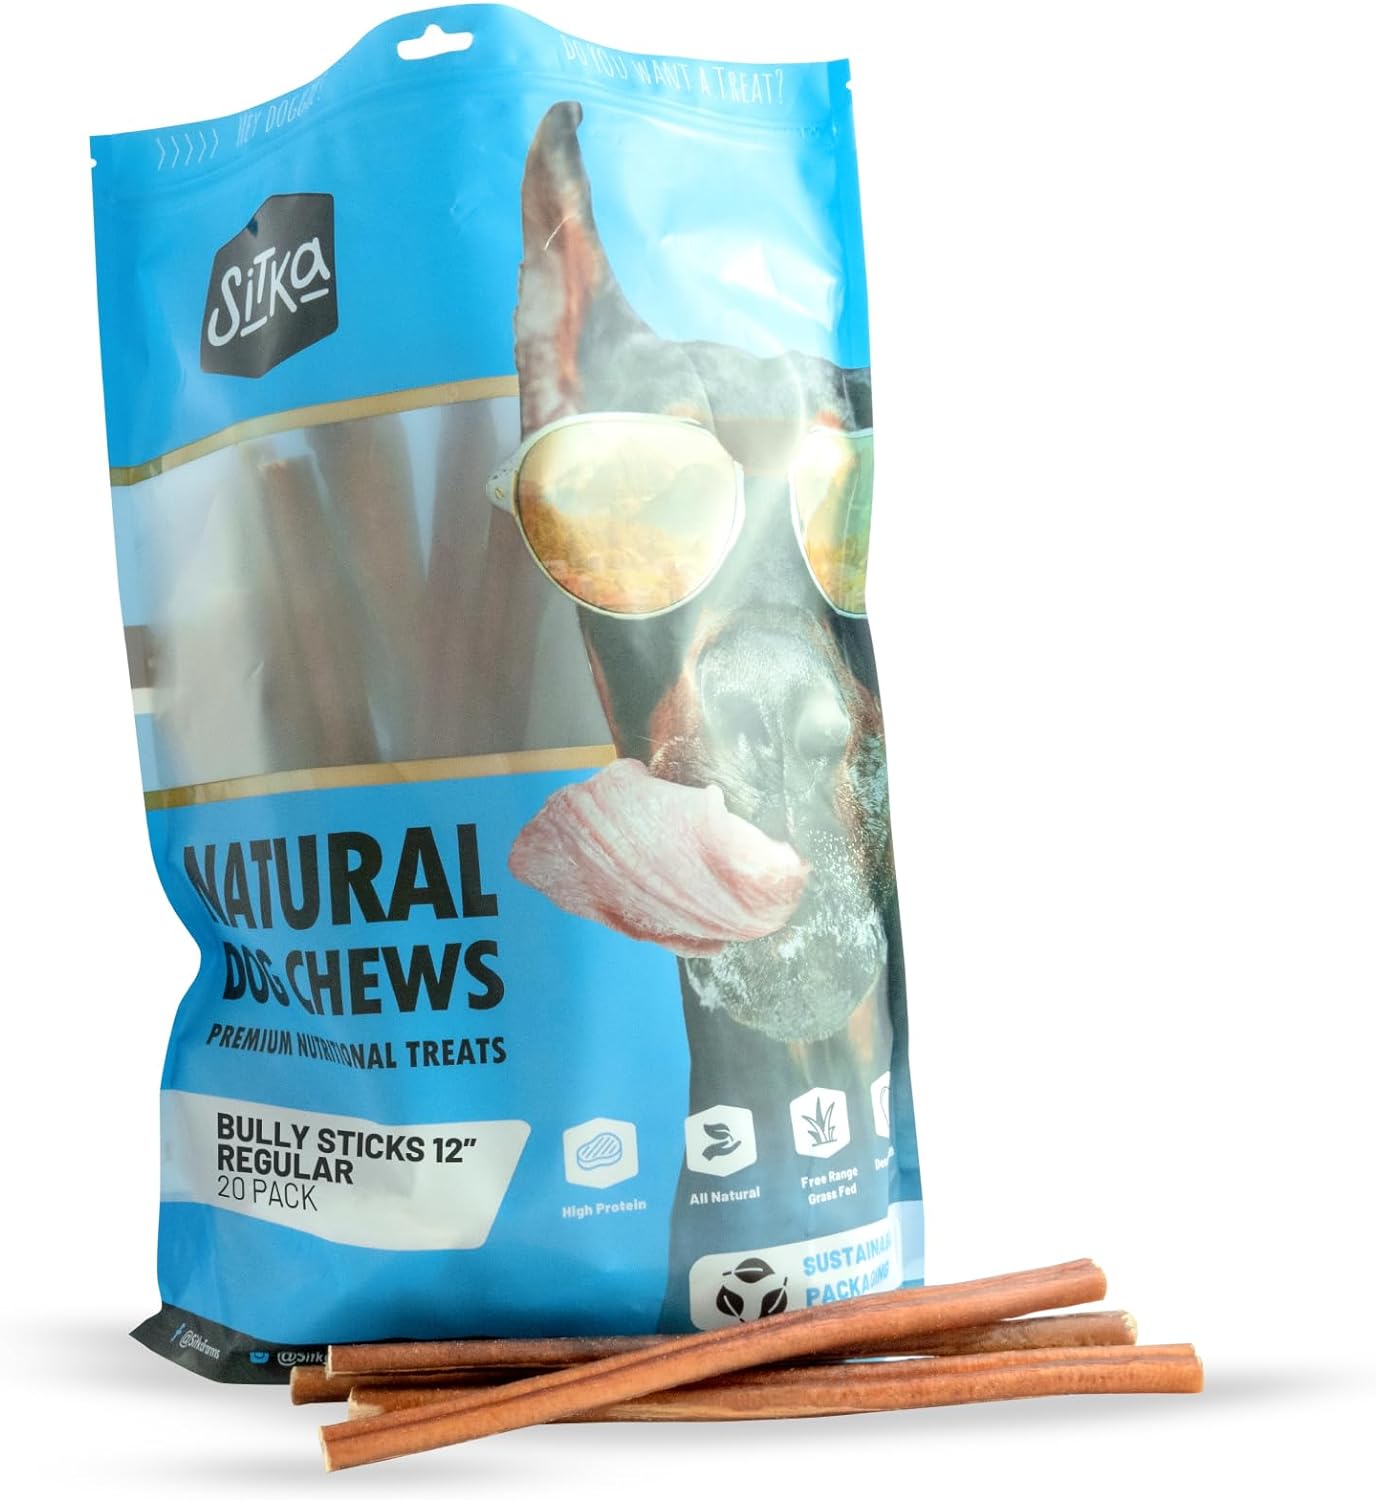 SITKA Farms Bully Sticks Regular 12 inch - 20 Count - Premium High Protein Long Lasting Dental Treats for Large Medium and Small Dogs - Rawhide Free Sticks for All Breeds